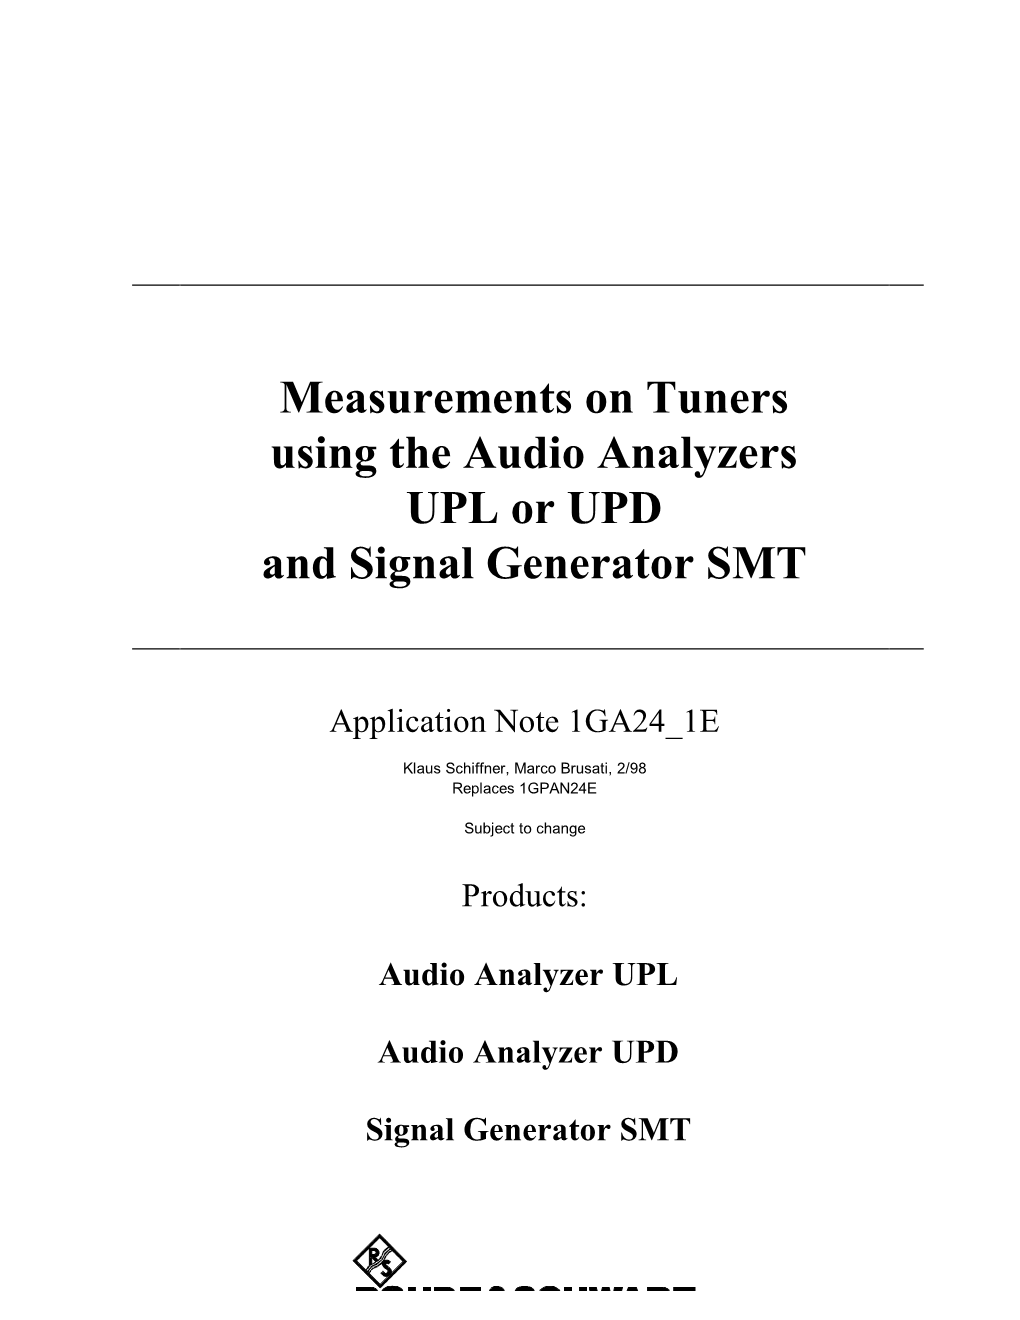 Measurements on Tuners Using the Audio Analyzers UPL Or UPD and Signal Generator SMT